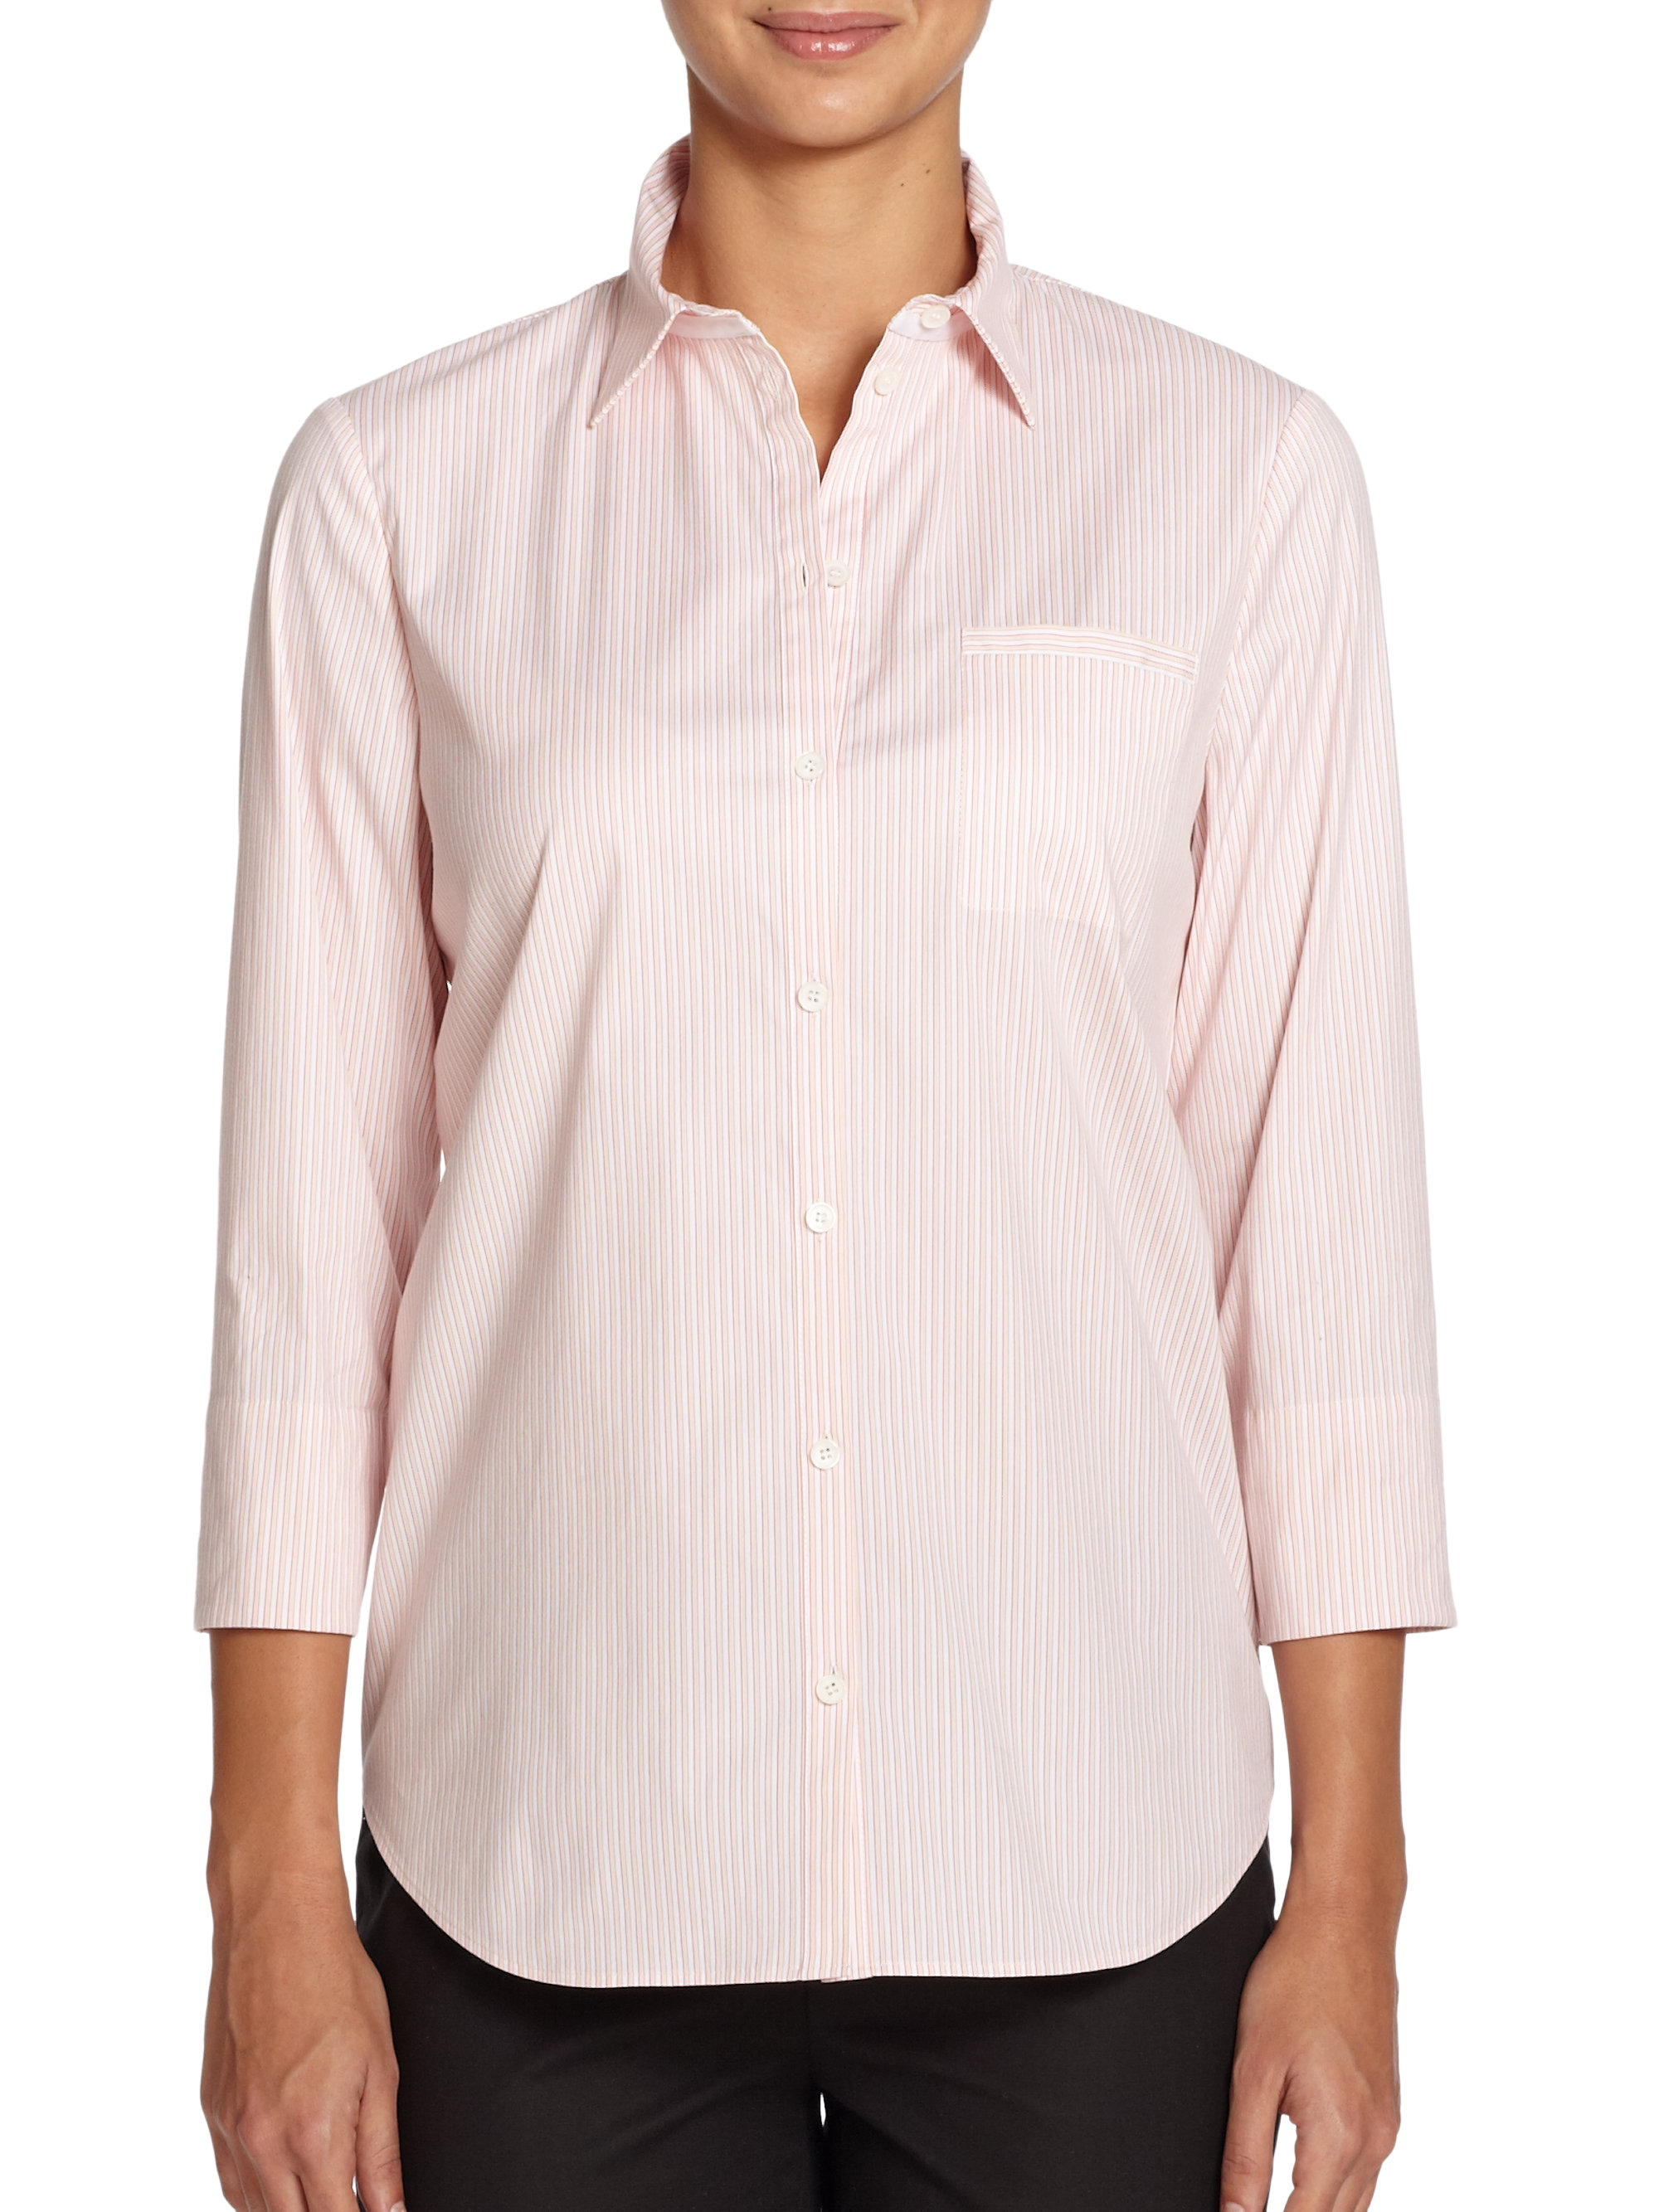 Lyst - Lafayette 148 New York Striped Button-Front Shirt in Pink